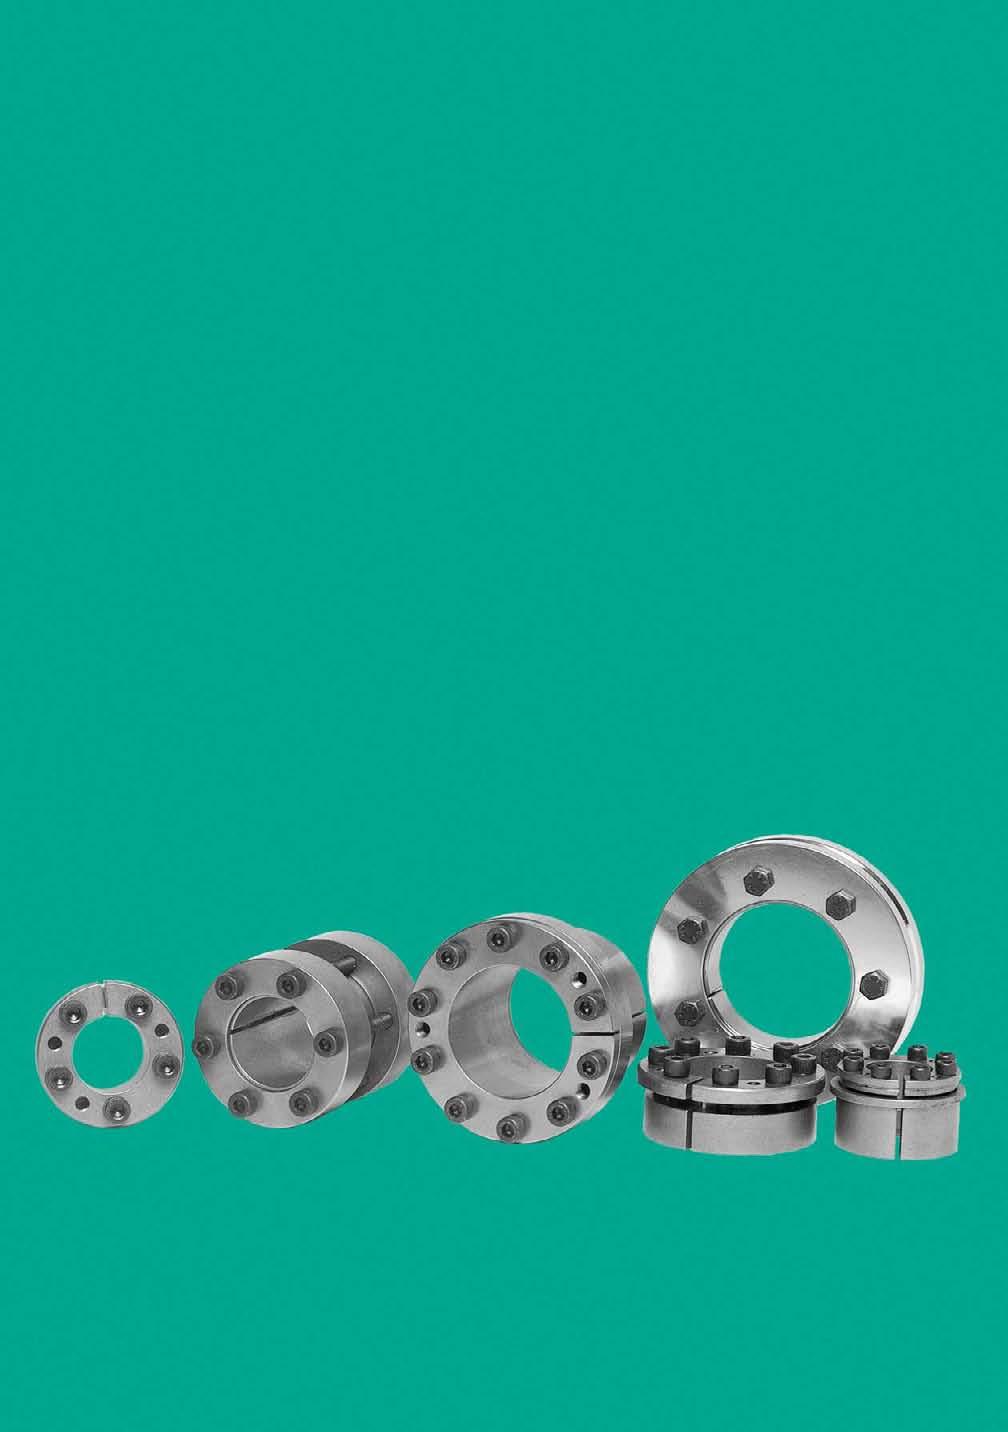 Power Transmission Products Roller Chain Drives Timing Belt Drives Silent Chain Drives Clamping Elements Overload Clutches Limiters ounted Bearings Stieber reewheels Couplings Sprag Clutches